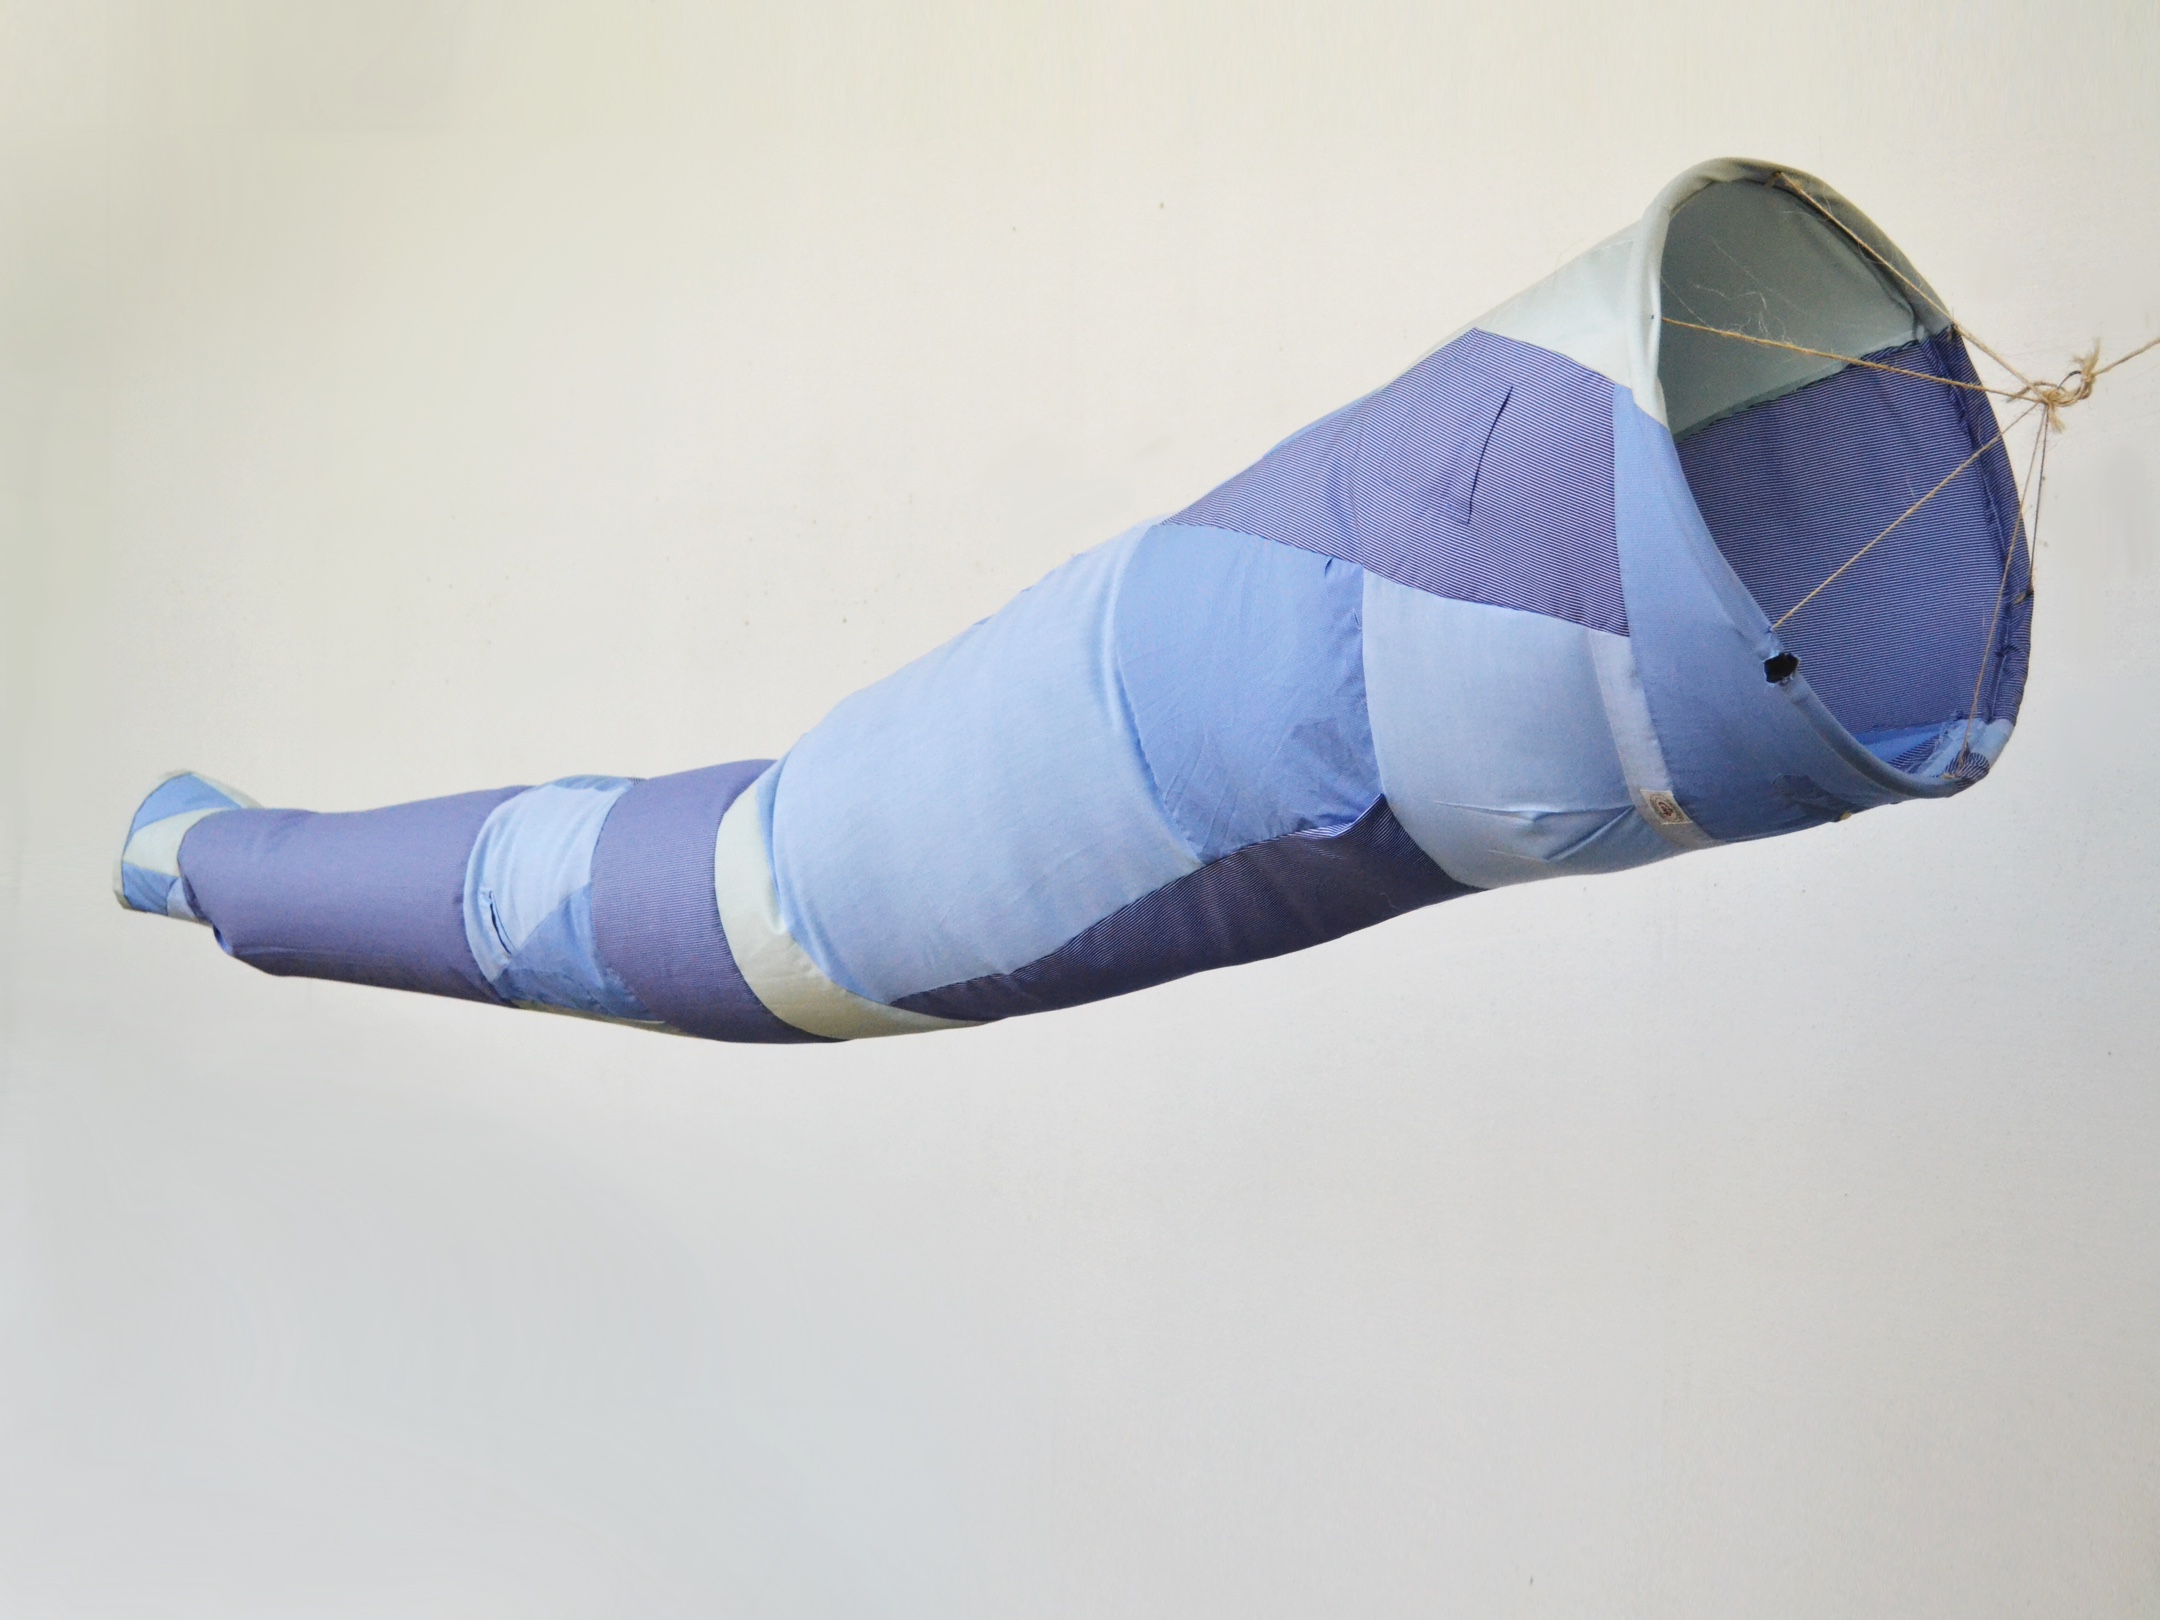 Wind sock made from various blue fabrics to look like a sleeve